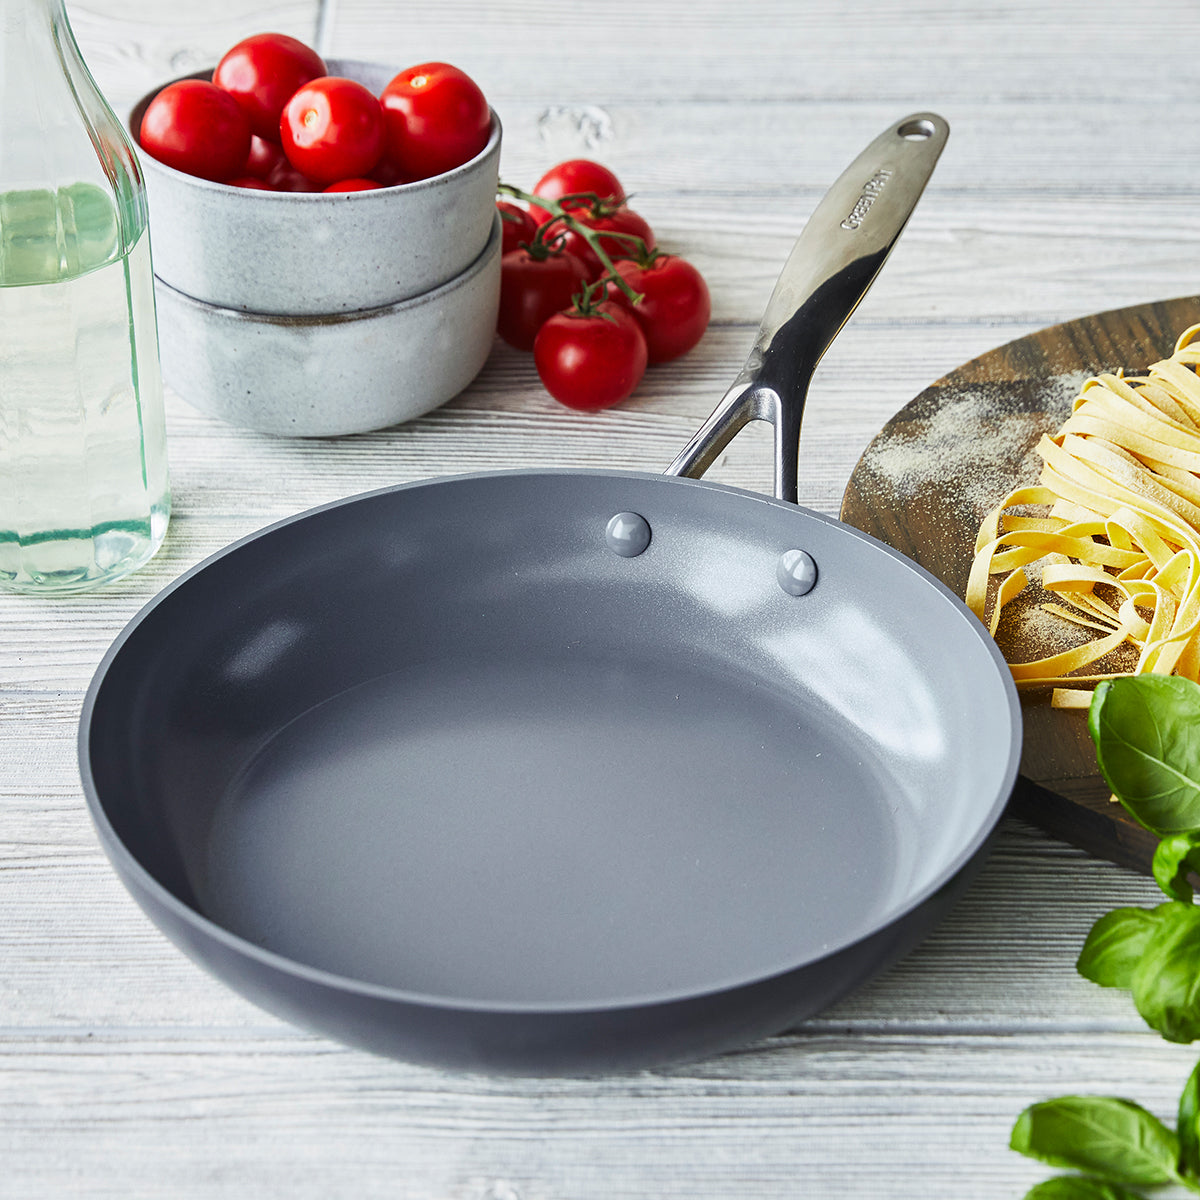 fry pan on countertop surrounded by tomatoes, pasta, and herbs.